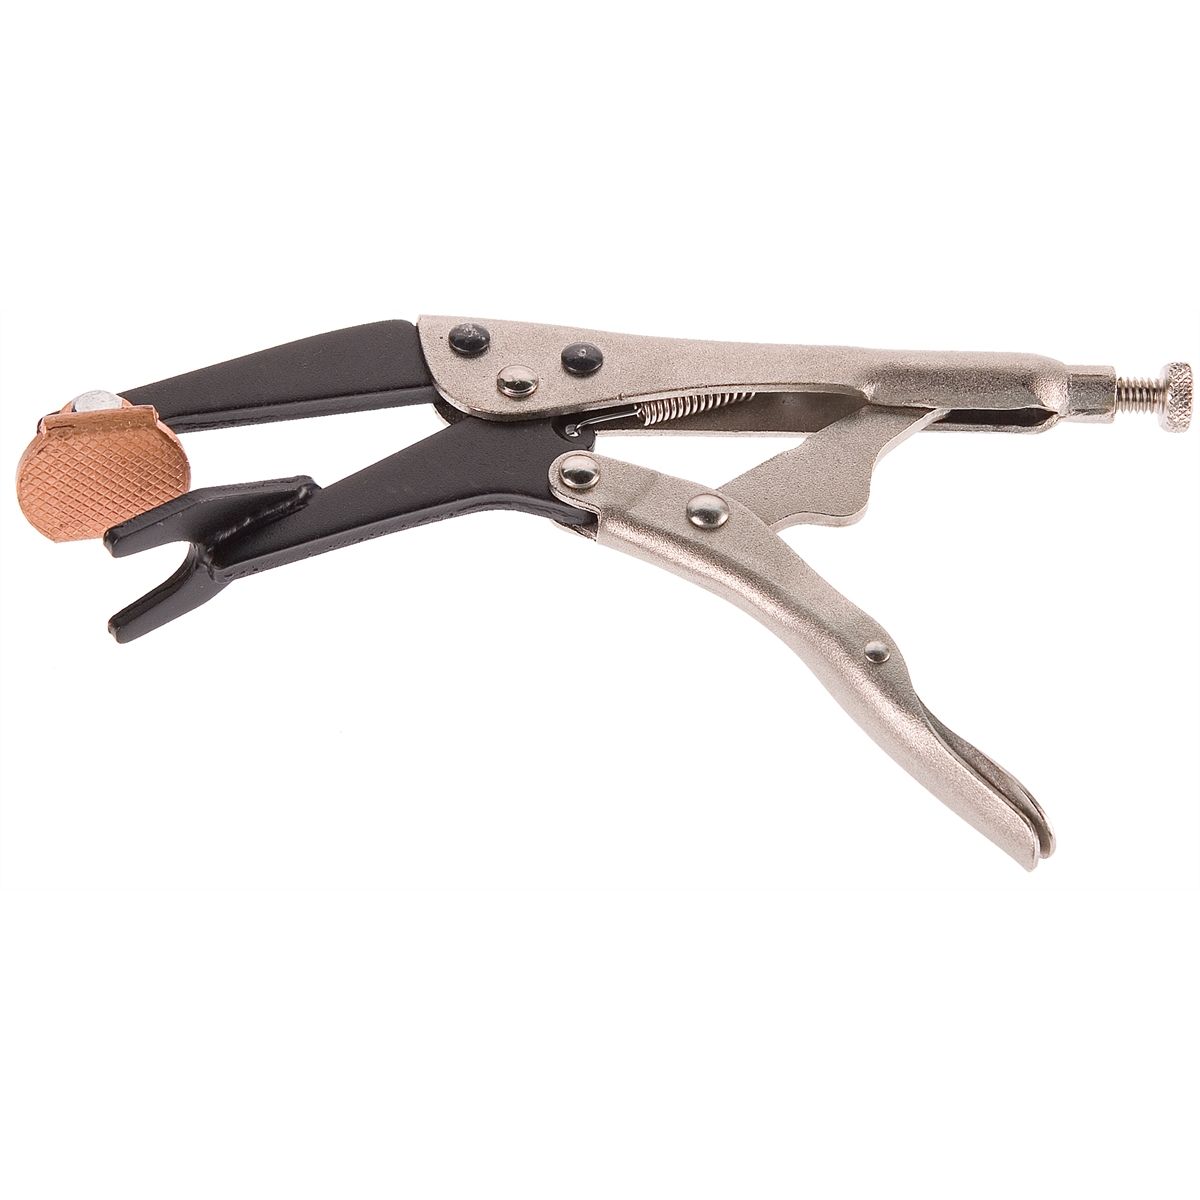 Convertible Retaining Ring Pliers (Blue-Point®), PRH57A